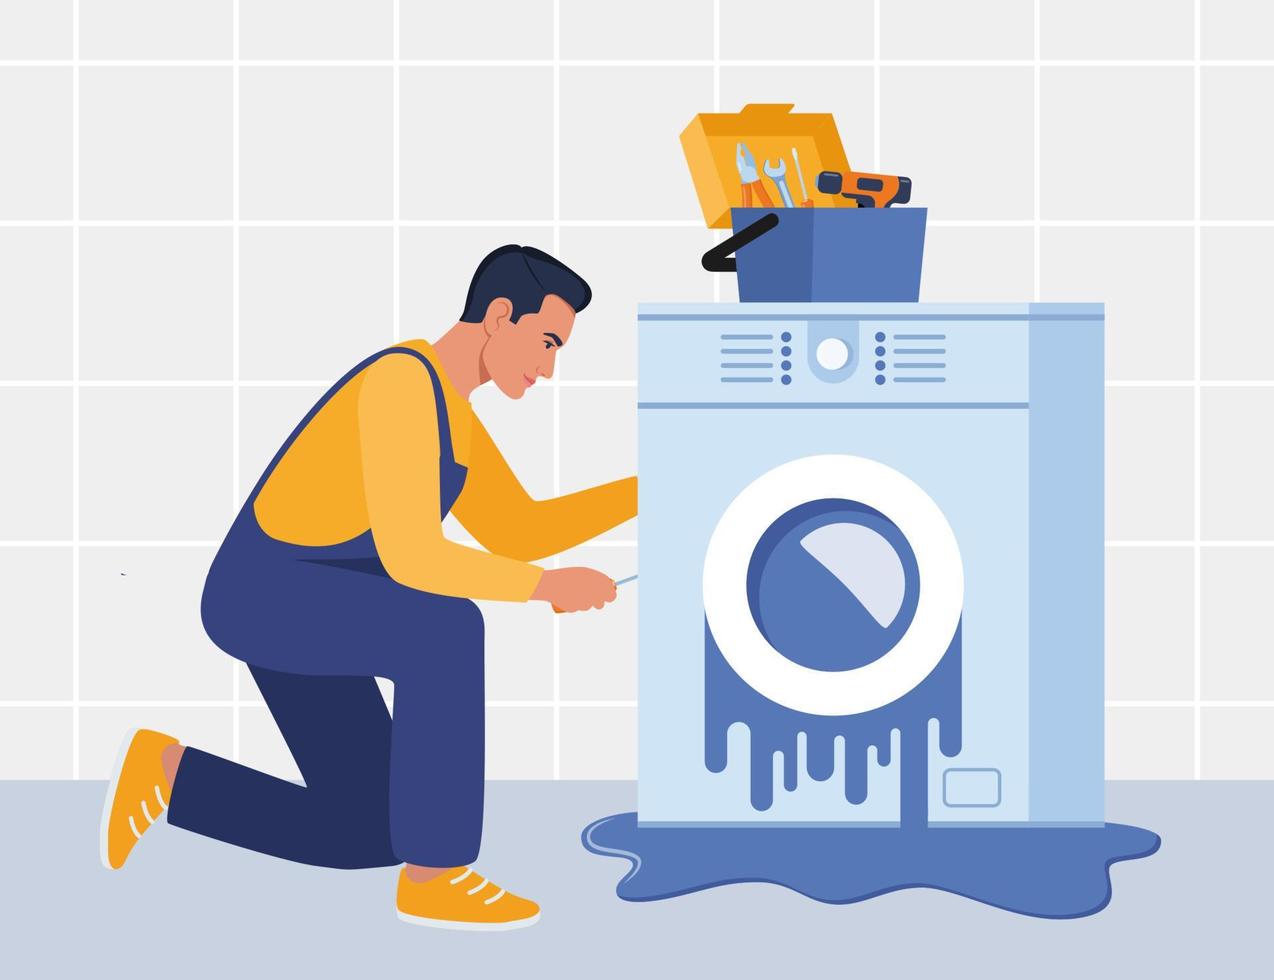 Master with set of professional tools repairs a washing machine. Washing machines repair service. Man character in uniform and washing machine with a breakdown. Vector illustration.